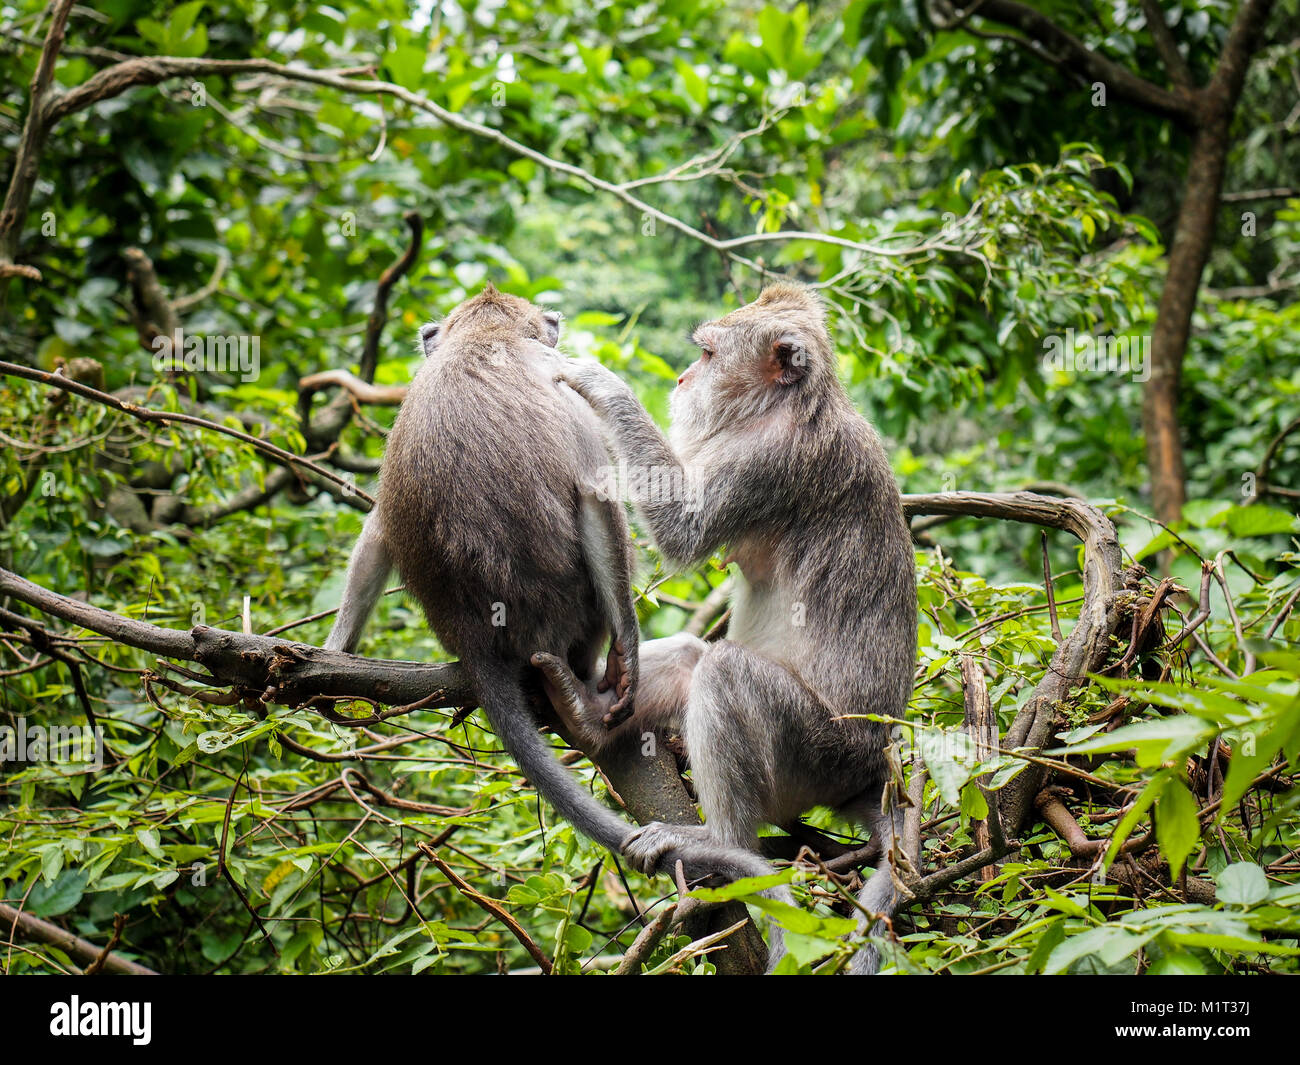 Two macaques are taking care of each other and delousing themselves. Wild monkeys in tree top level in the jungle Stock Photo